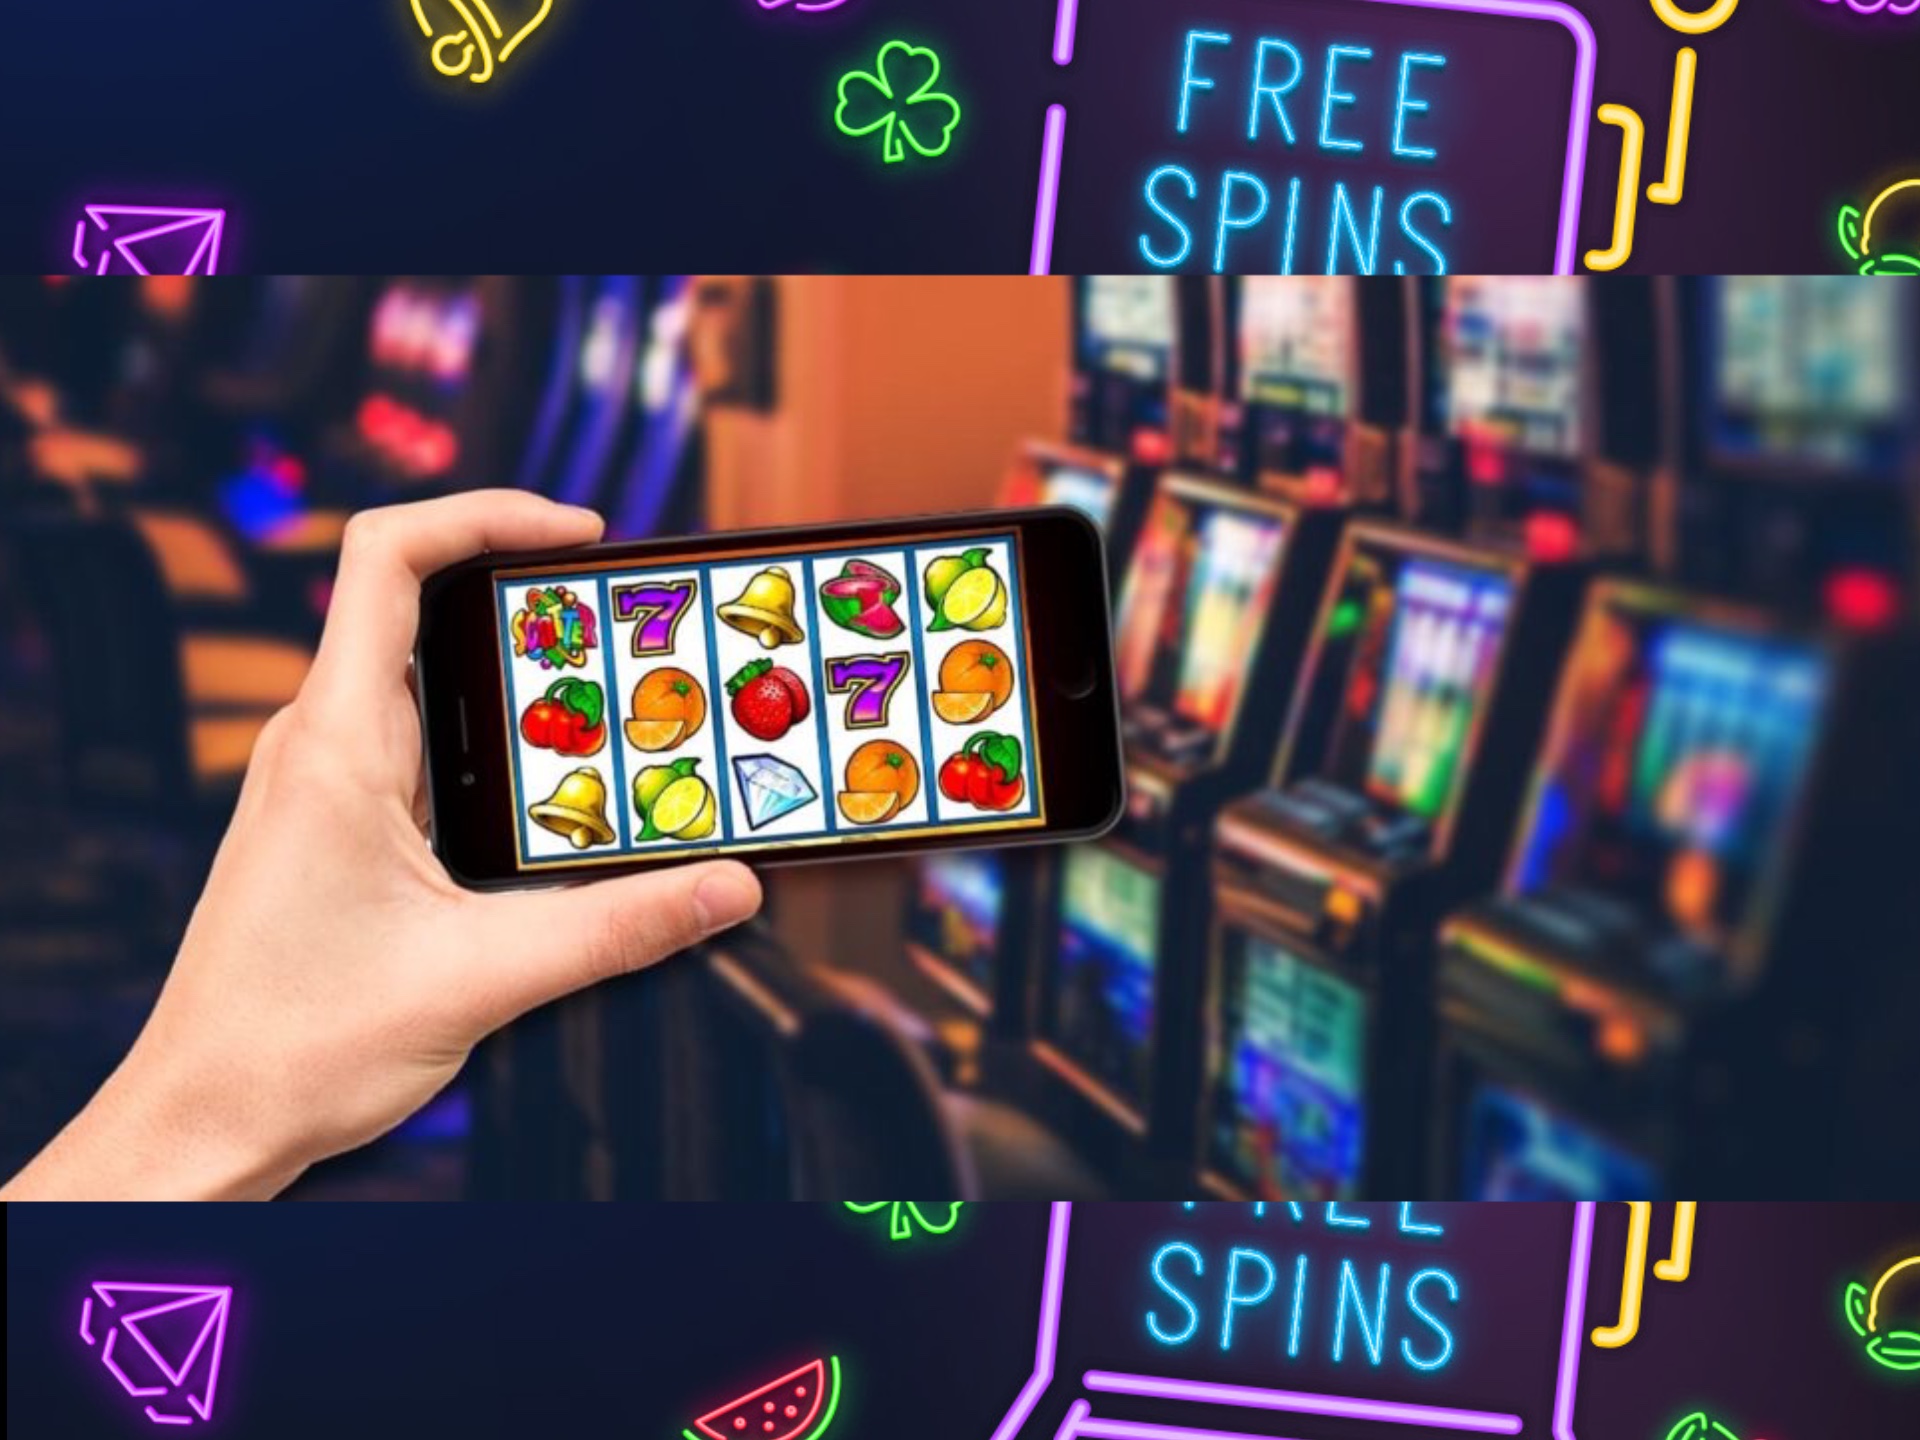 Free spins is another mobile bonus that gives your some spins in online slots without crediting your money